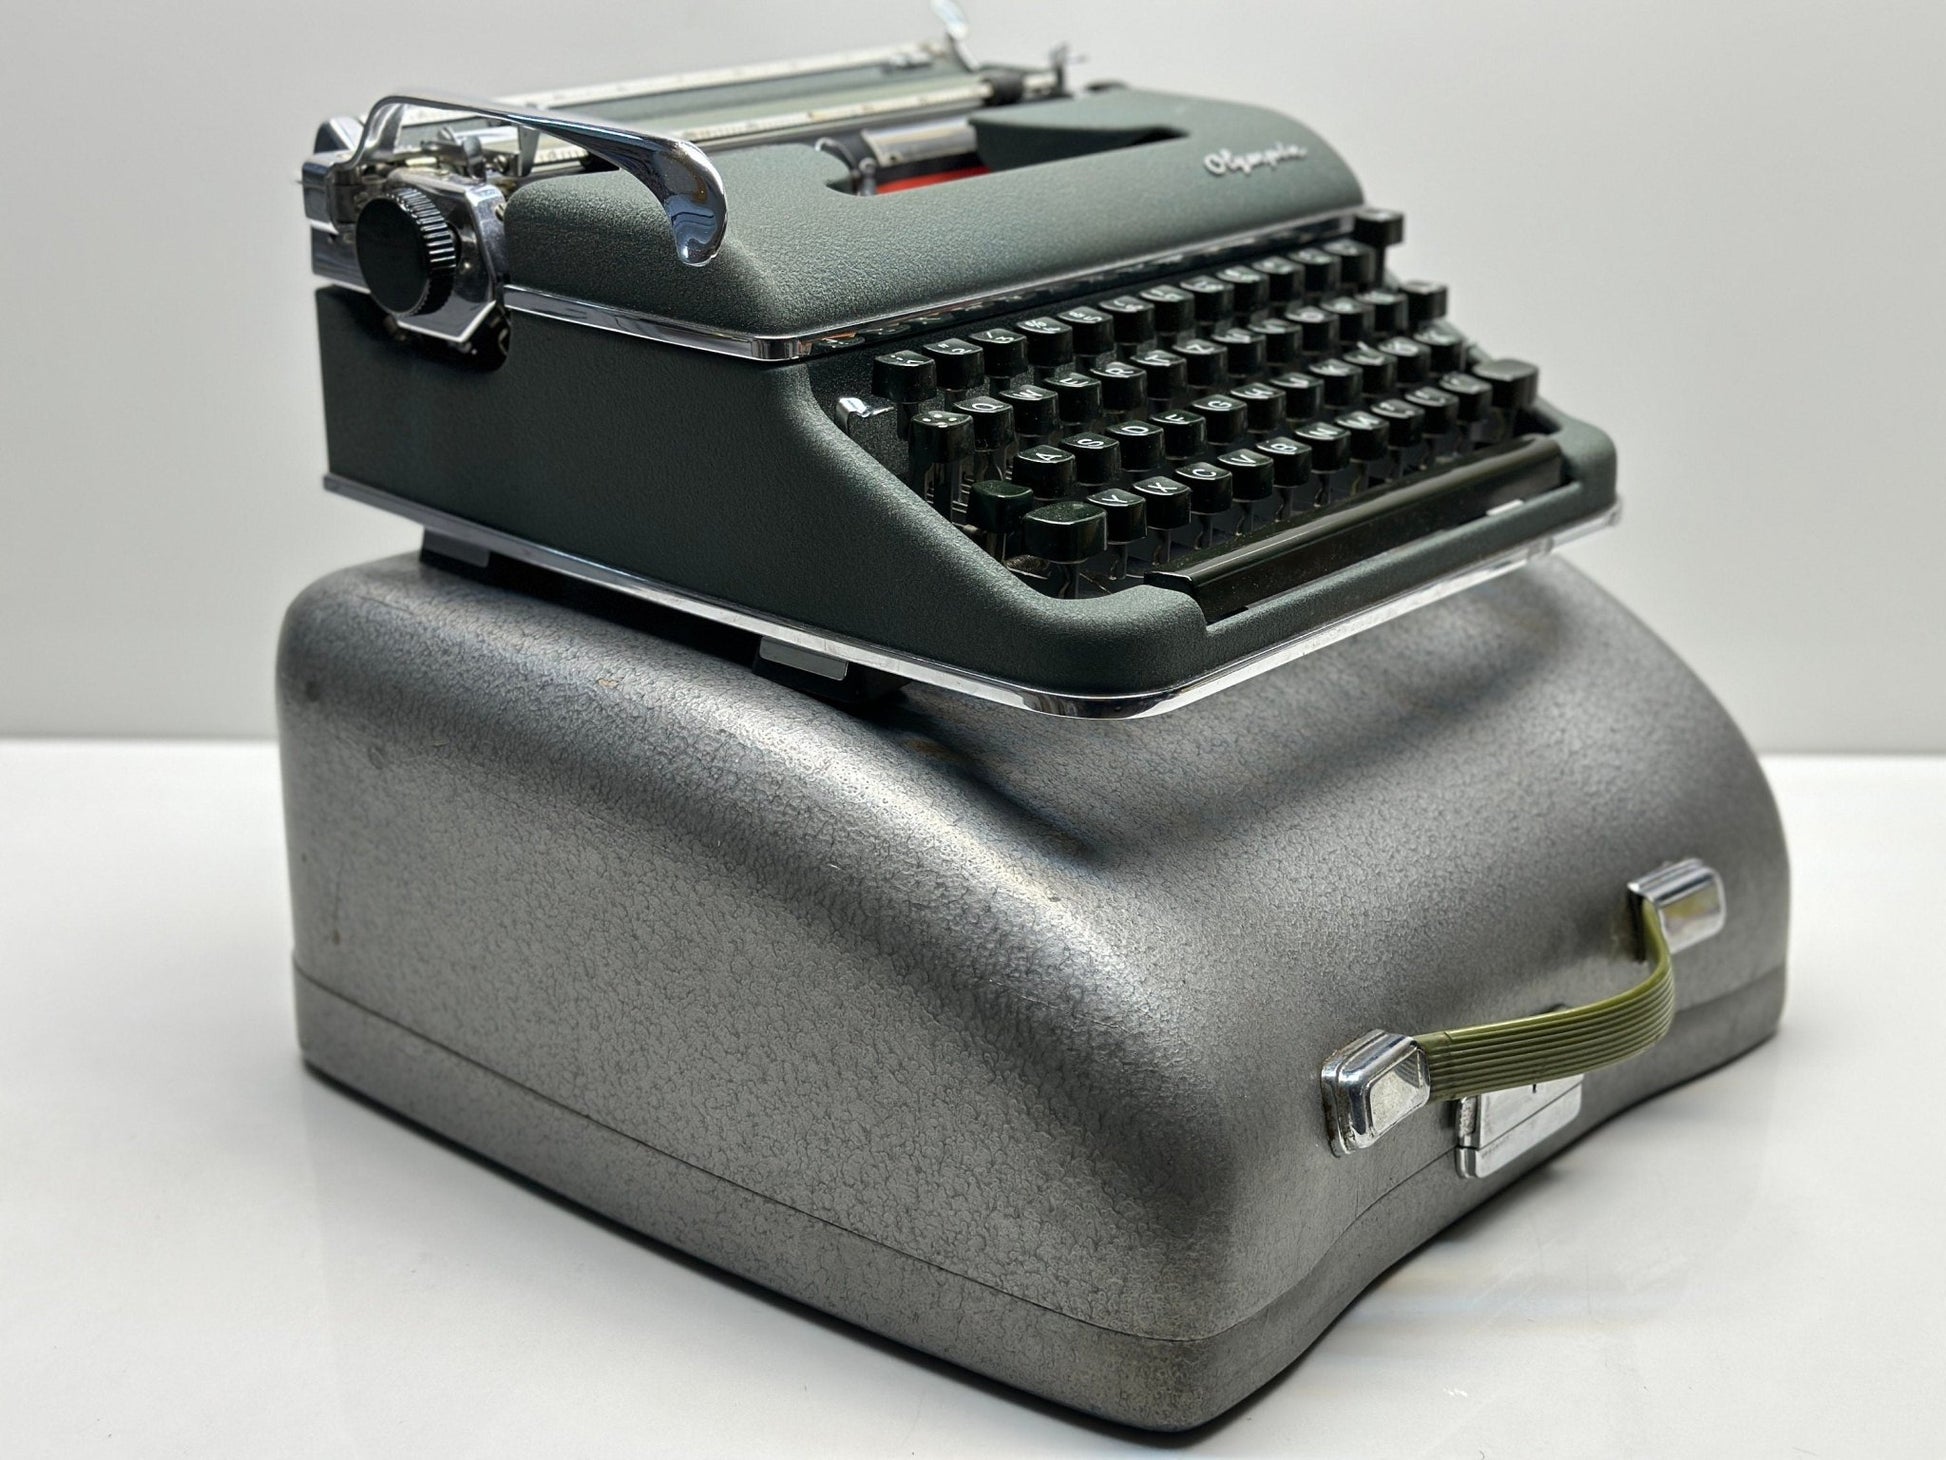 Original Green Olympia SM3 Classic Style Typewriter - Fusion of Timeless Aesthetics and Functionality